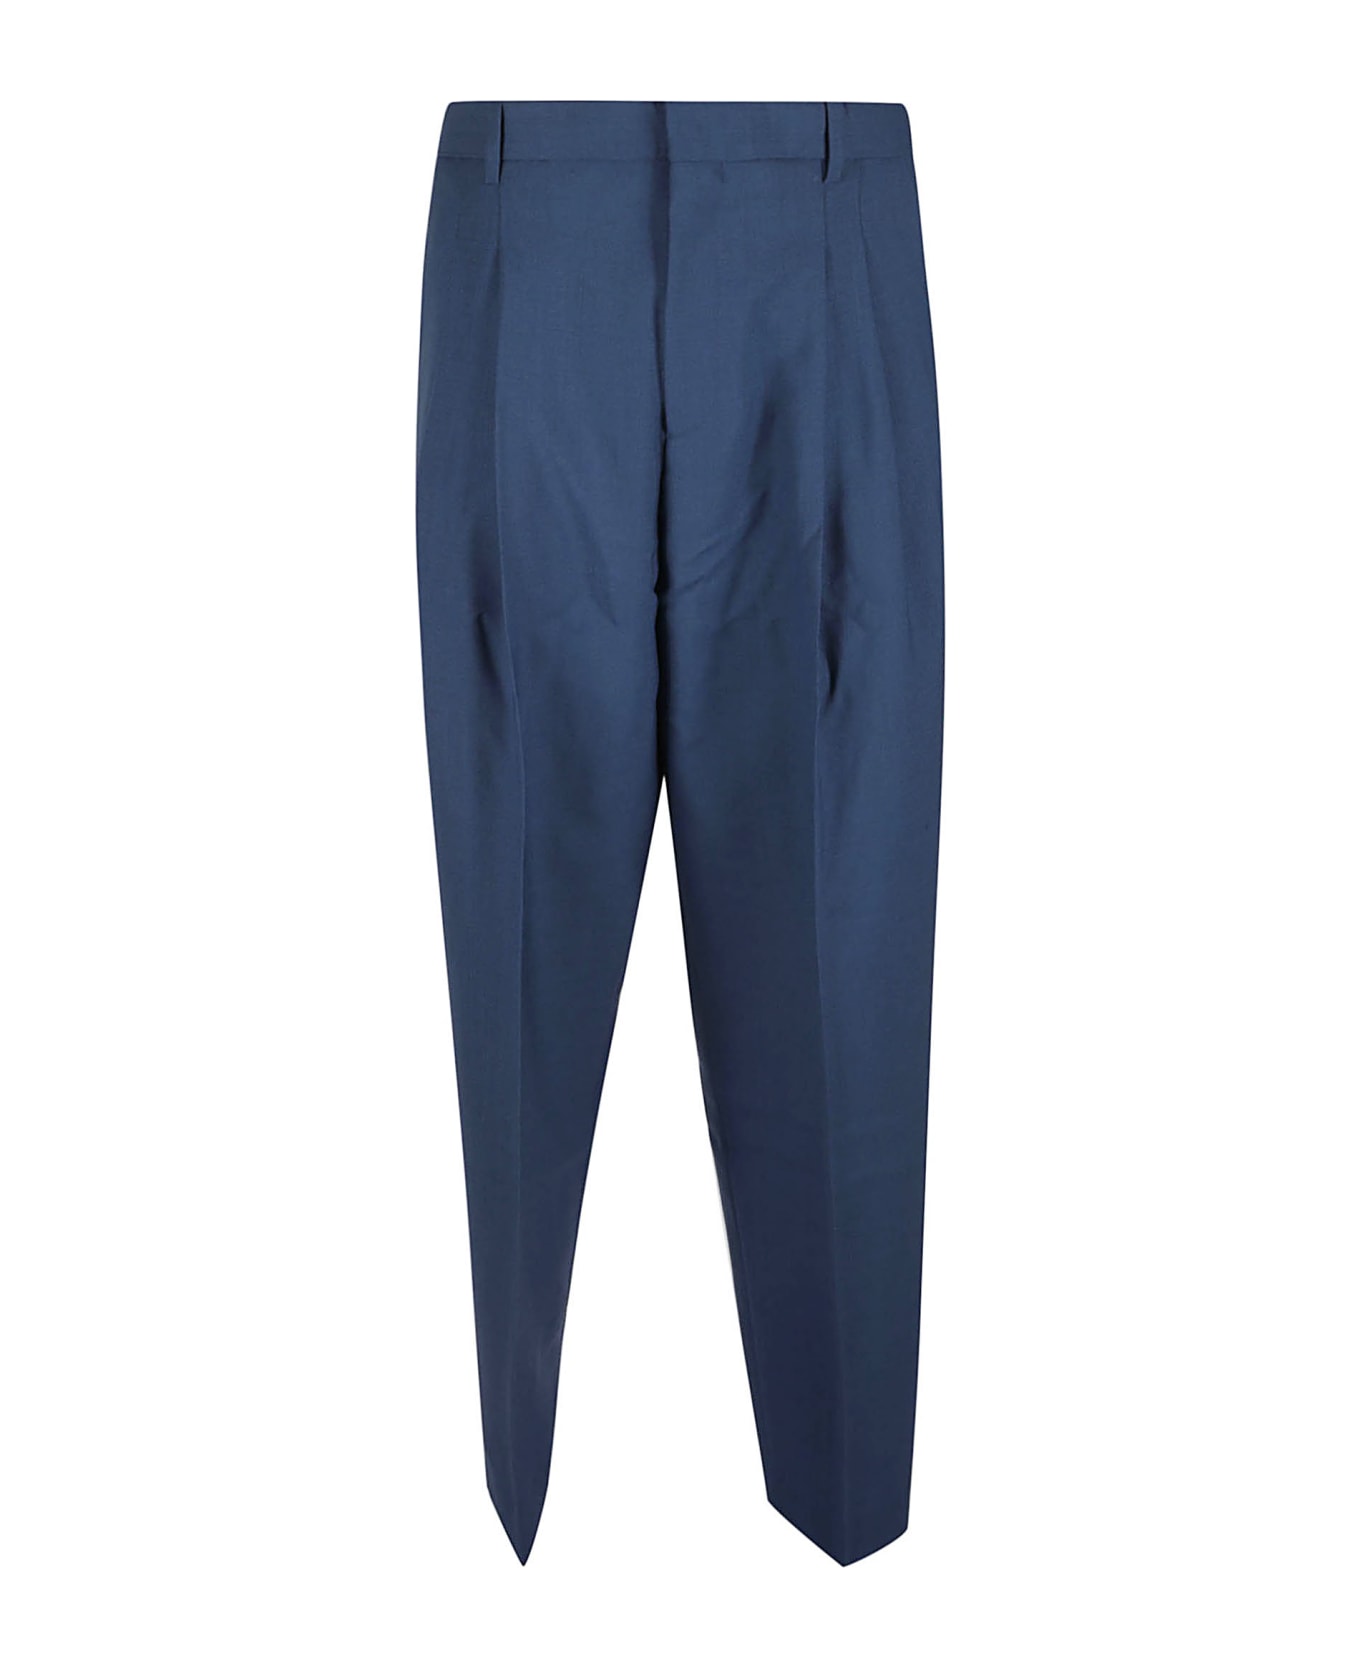 Charles Jeffrey Loverboy Back Logo Trousers - Blue ボトムス